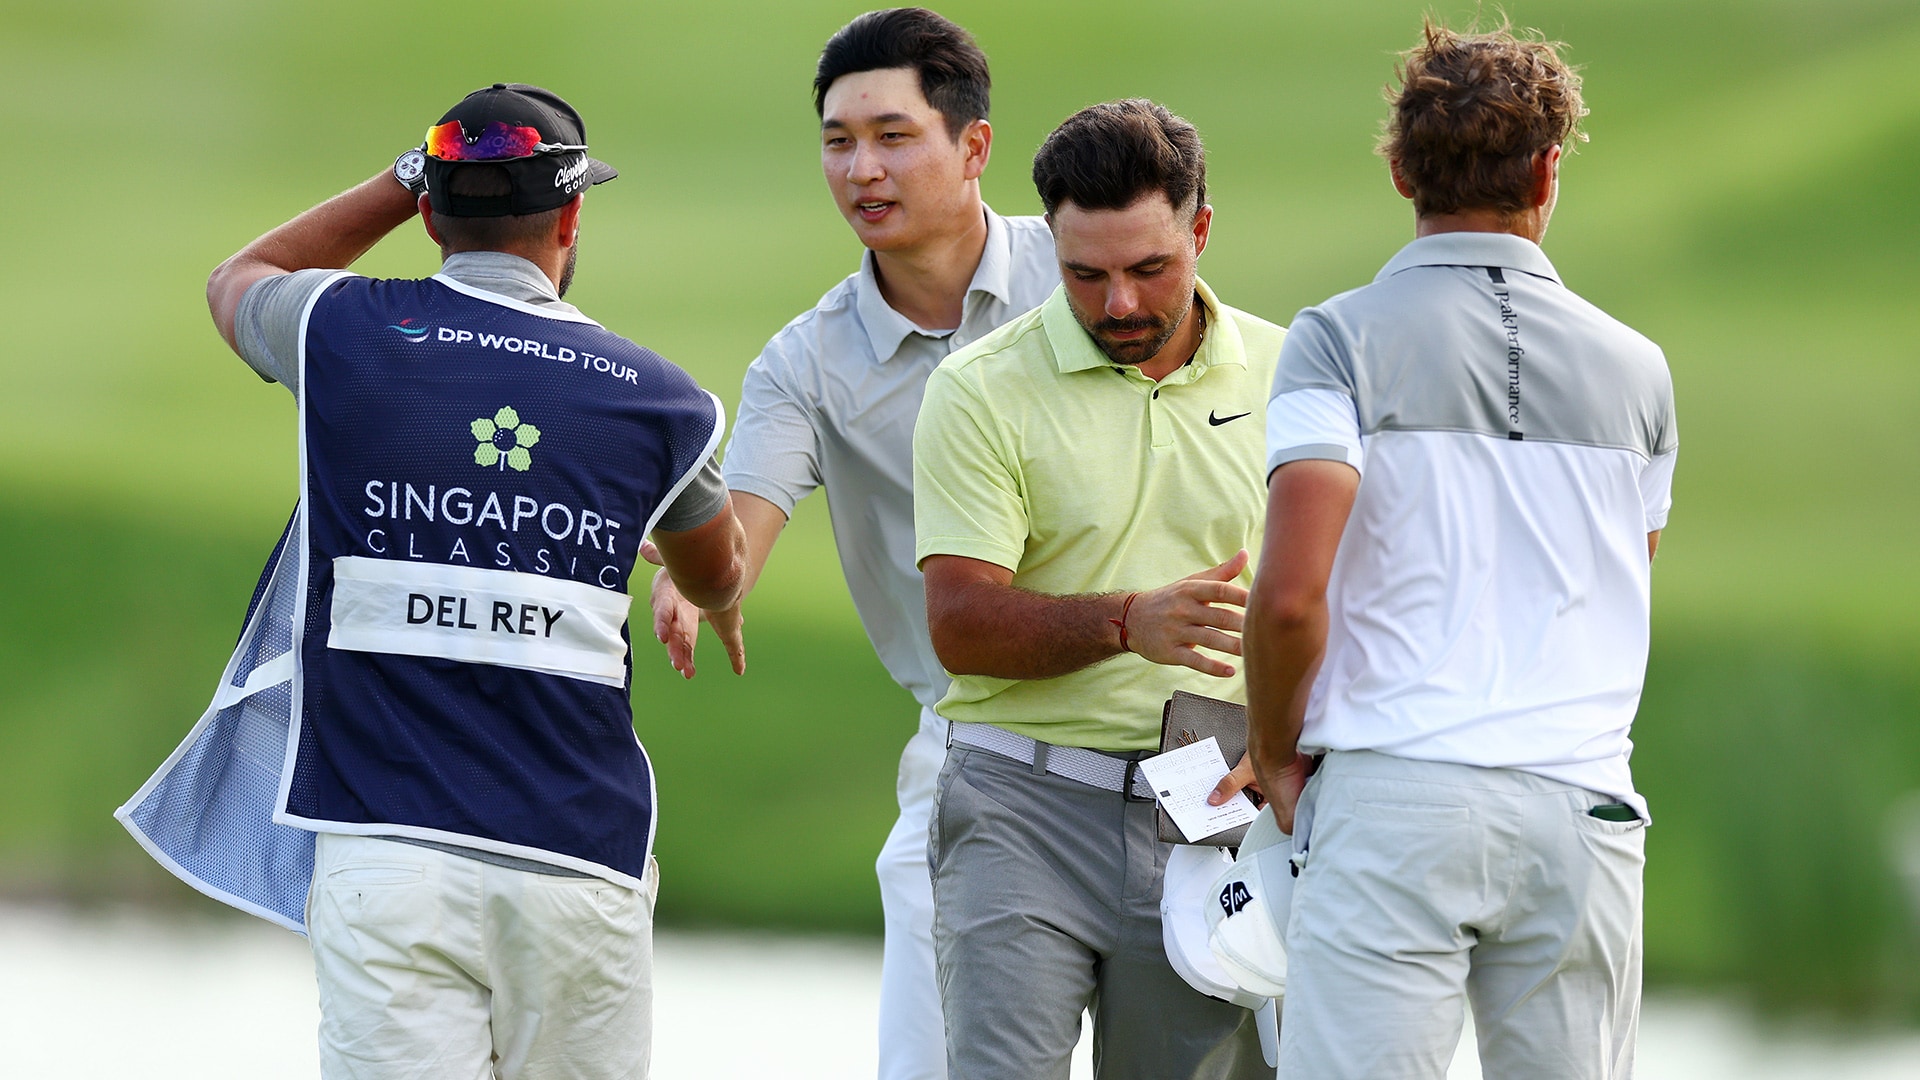 Two co-lead packed leaderboard entering final round of Singapore Classic